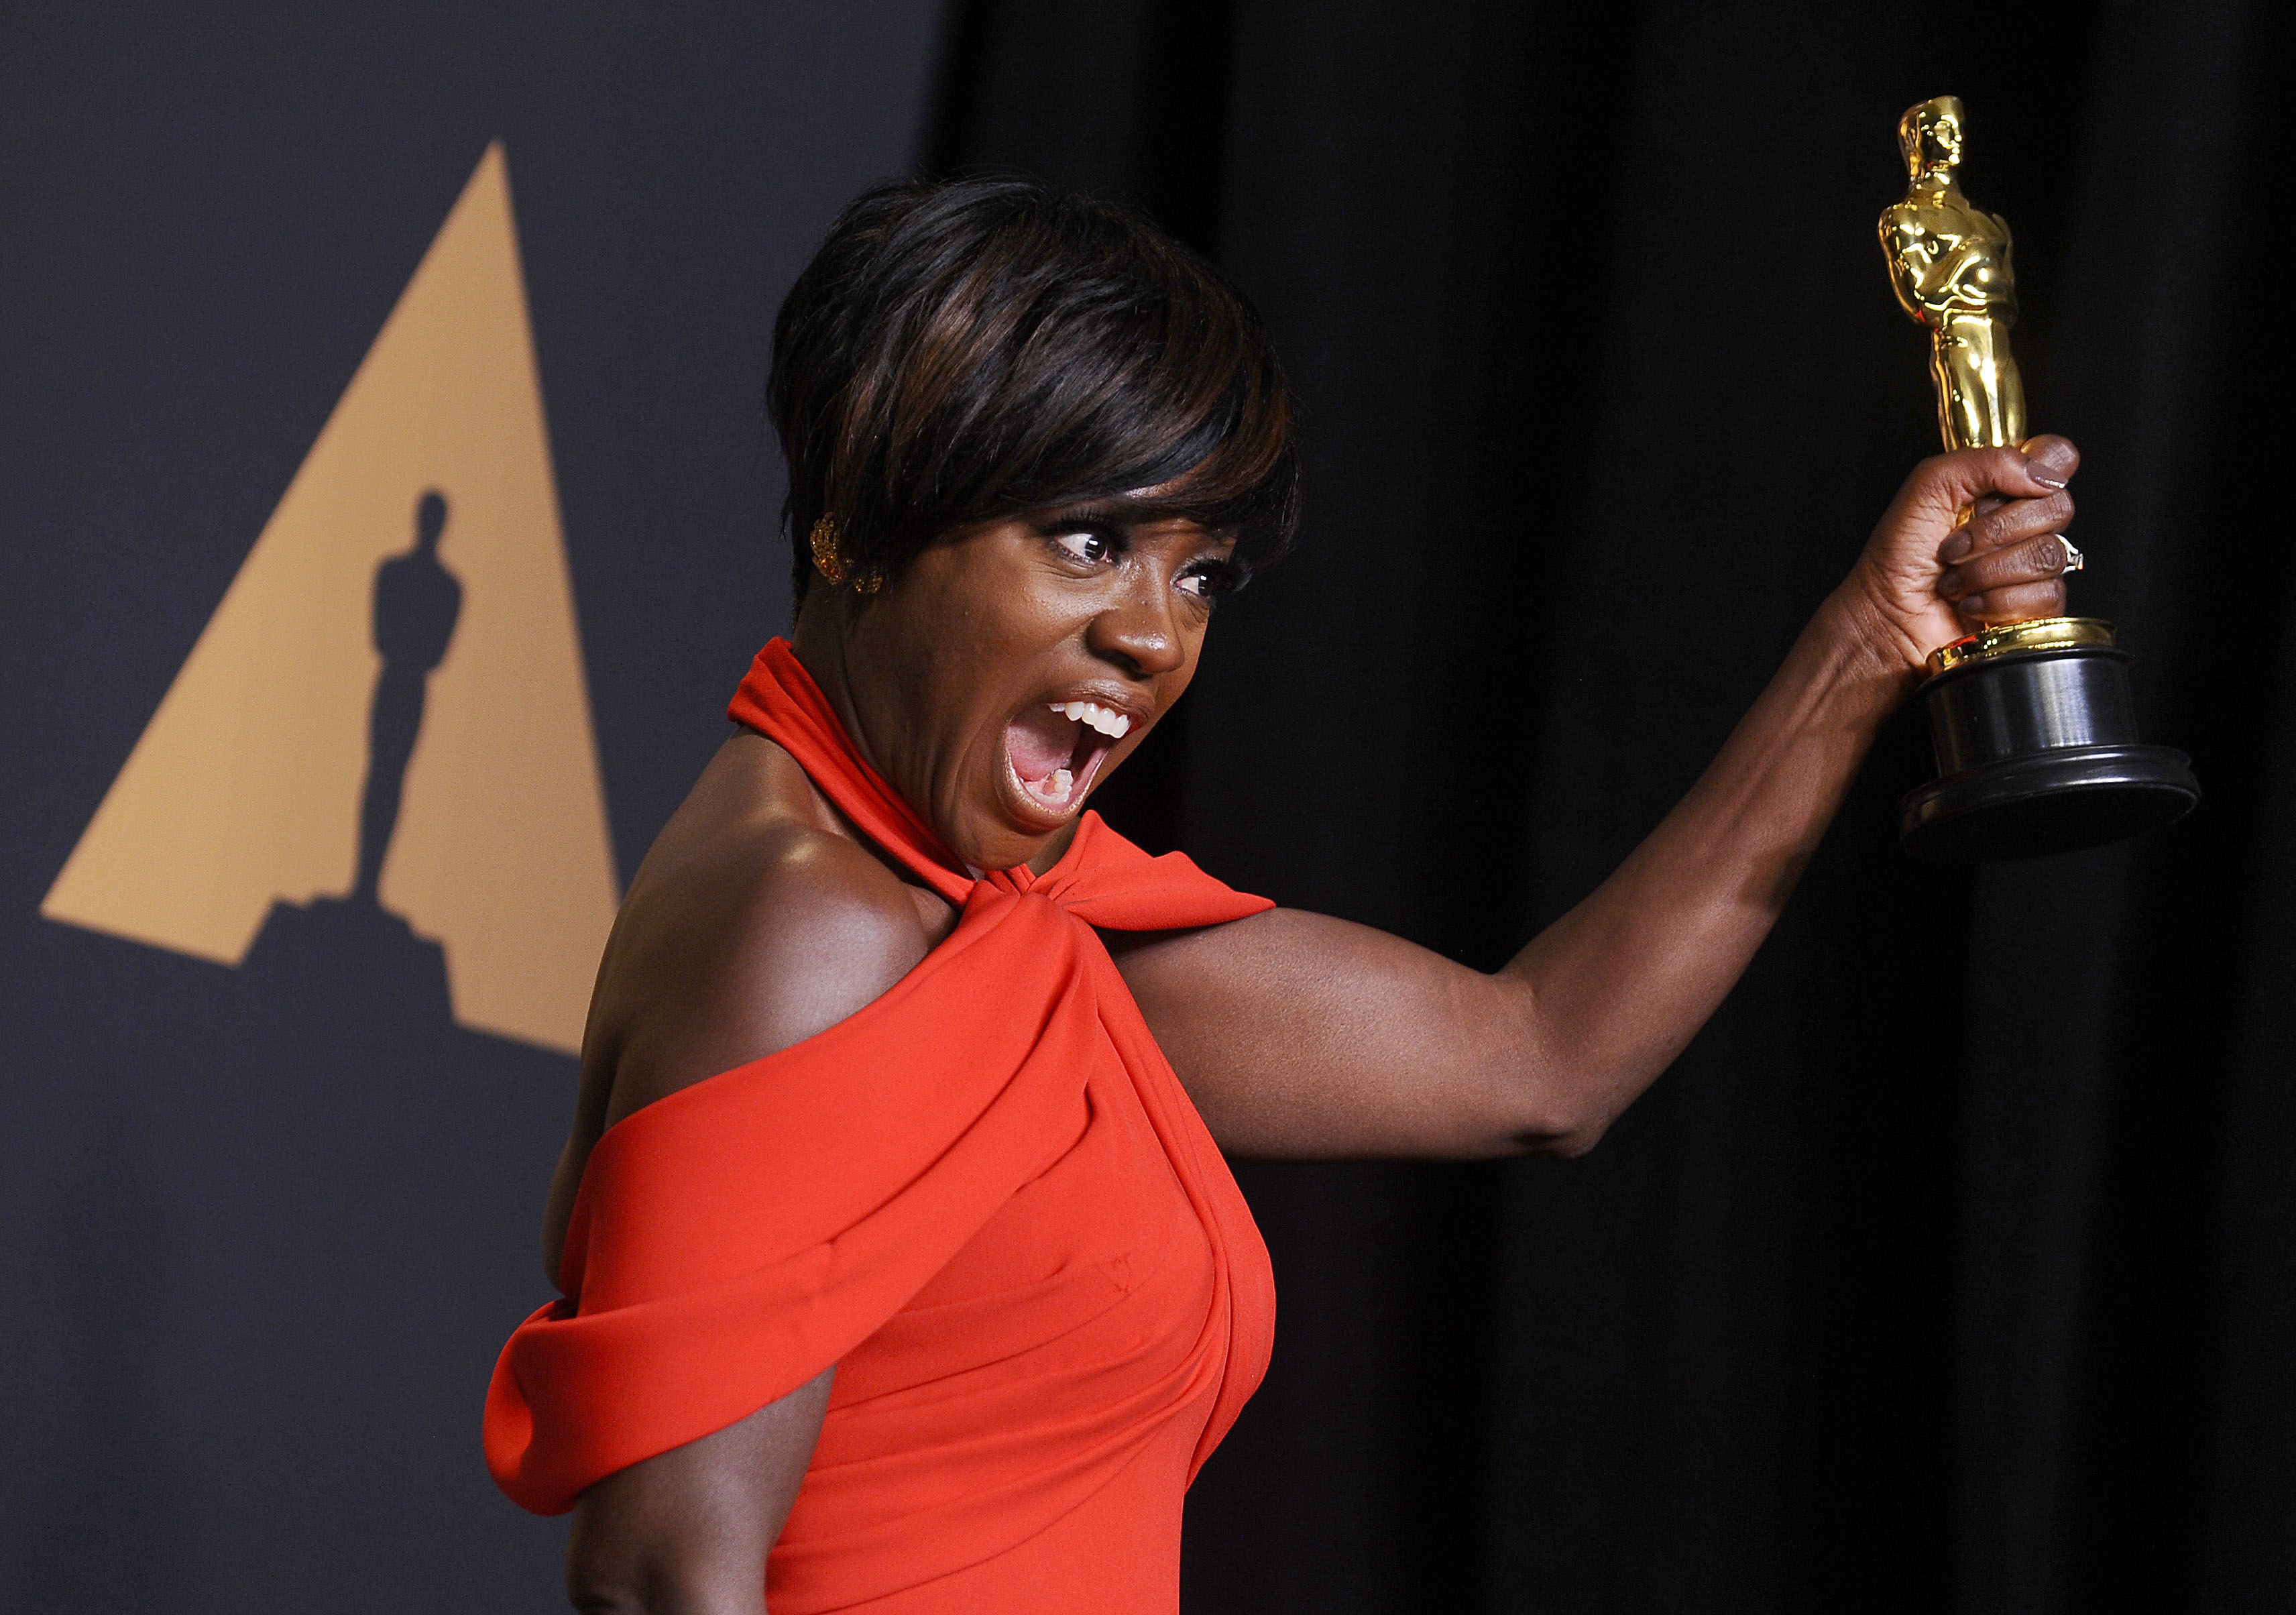 <p>When Viola Davis was nominated for best actress in 2021 for her performance in "Ma Rainey's Black Bottom," she became the first Black actress to receive four Oscar nods. Her first three nominations came in 2009 (best supporting actress for her work in "Doubt"), in 2012 (best actress for her performance in "The Help") and in 2017 (best supporting actress her work in "Fences" -- which she won).</p>